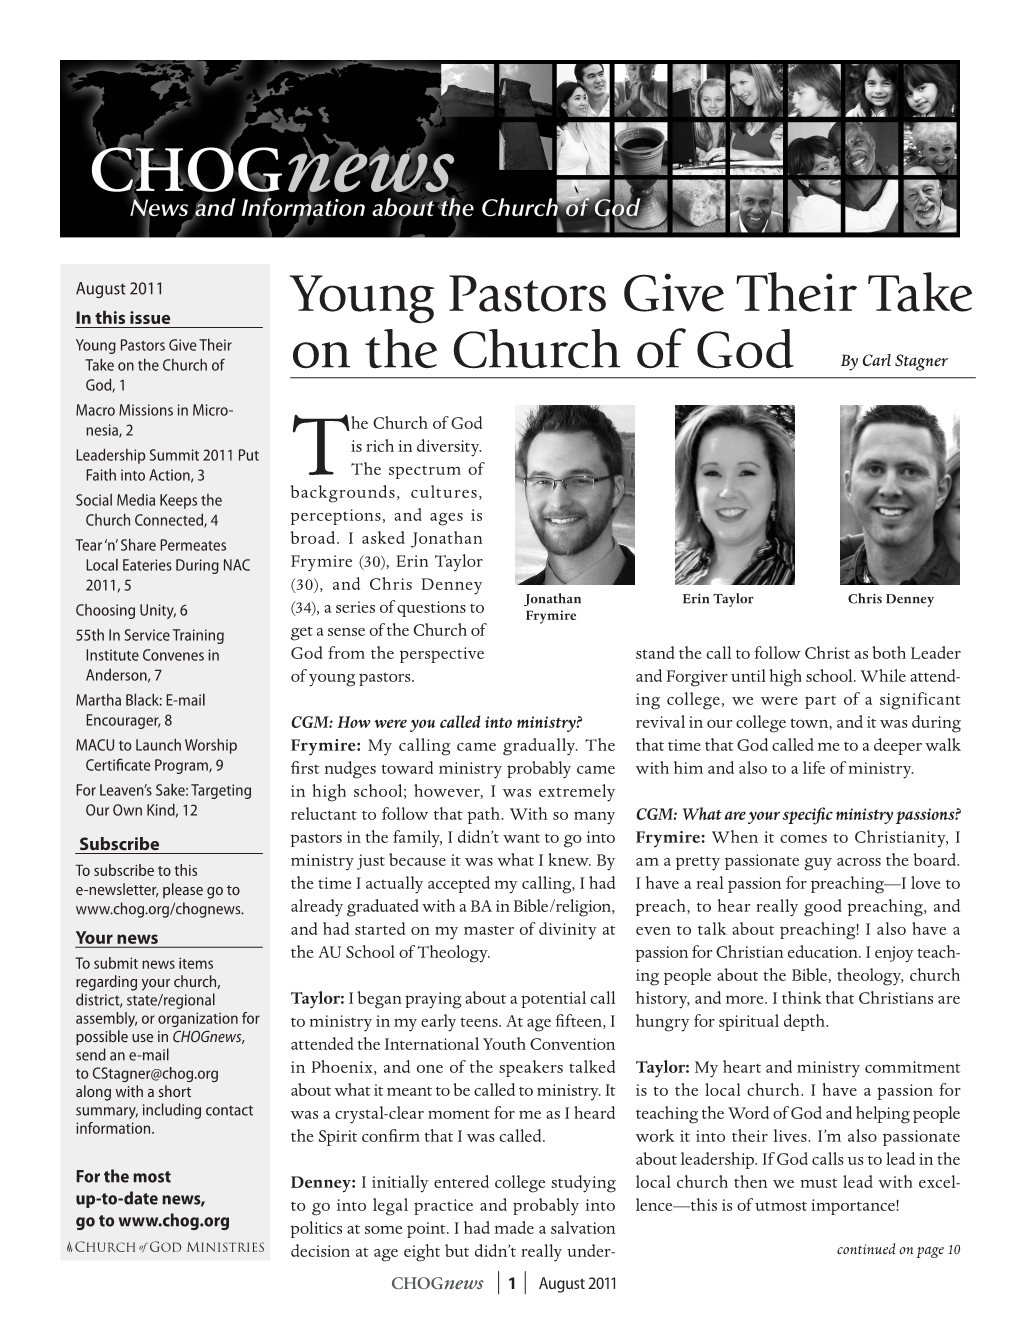 Young Pastors Give Their Take on the Church of God by Carl Stagner